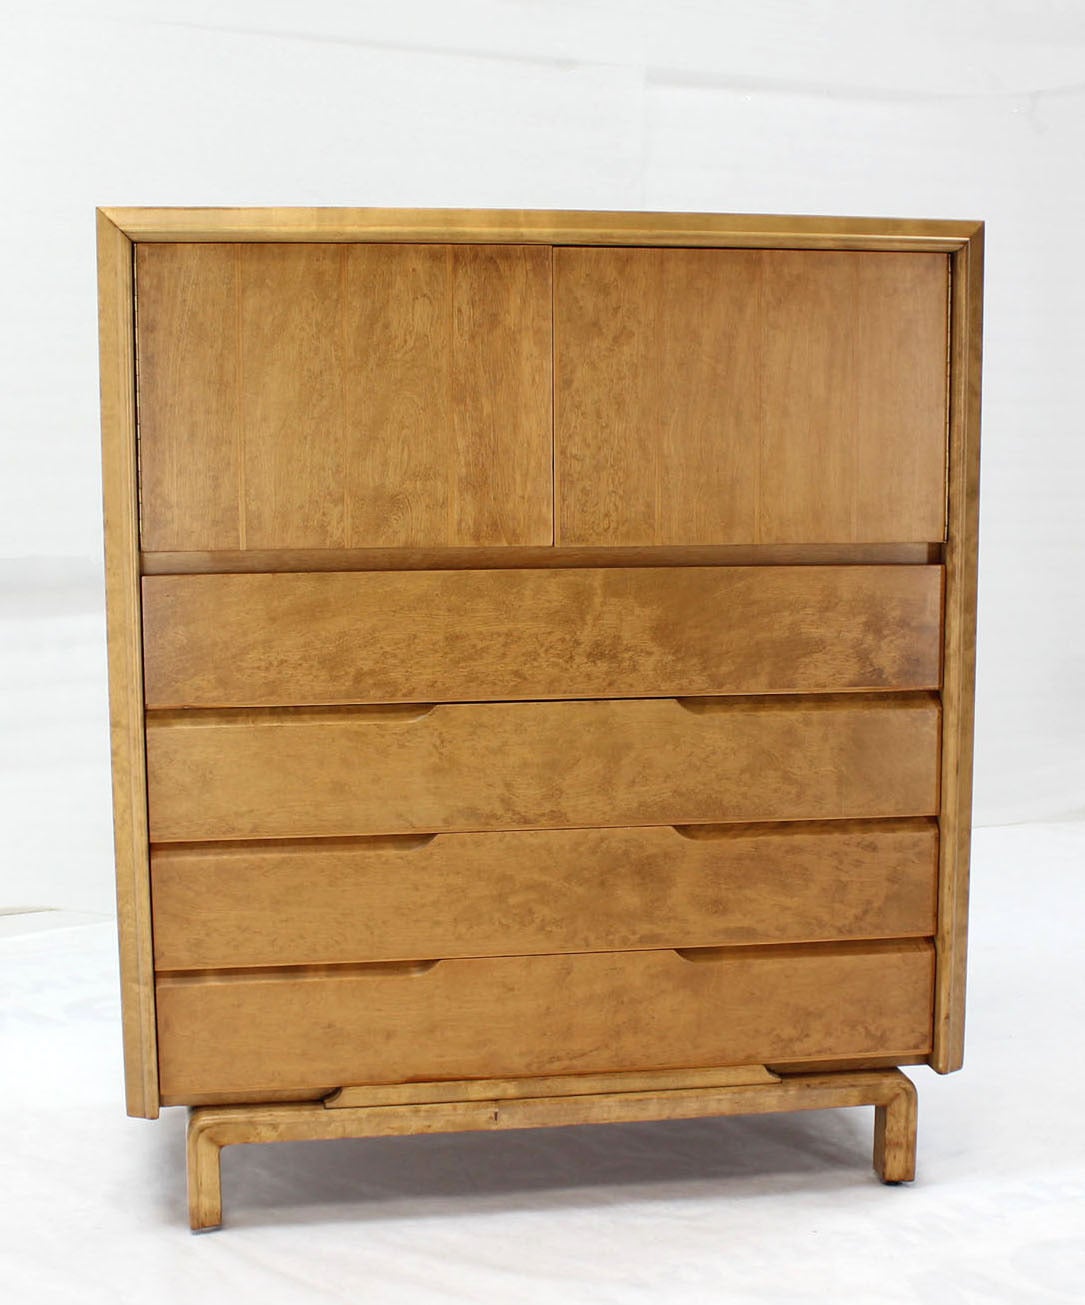 Lacquered Edmund Spence Mid Century Swedish Modern Birch High Chest of Drawers